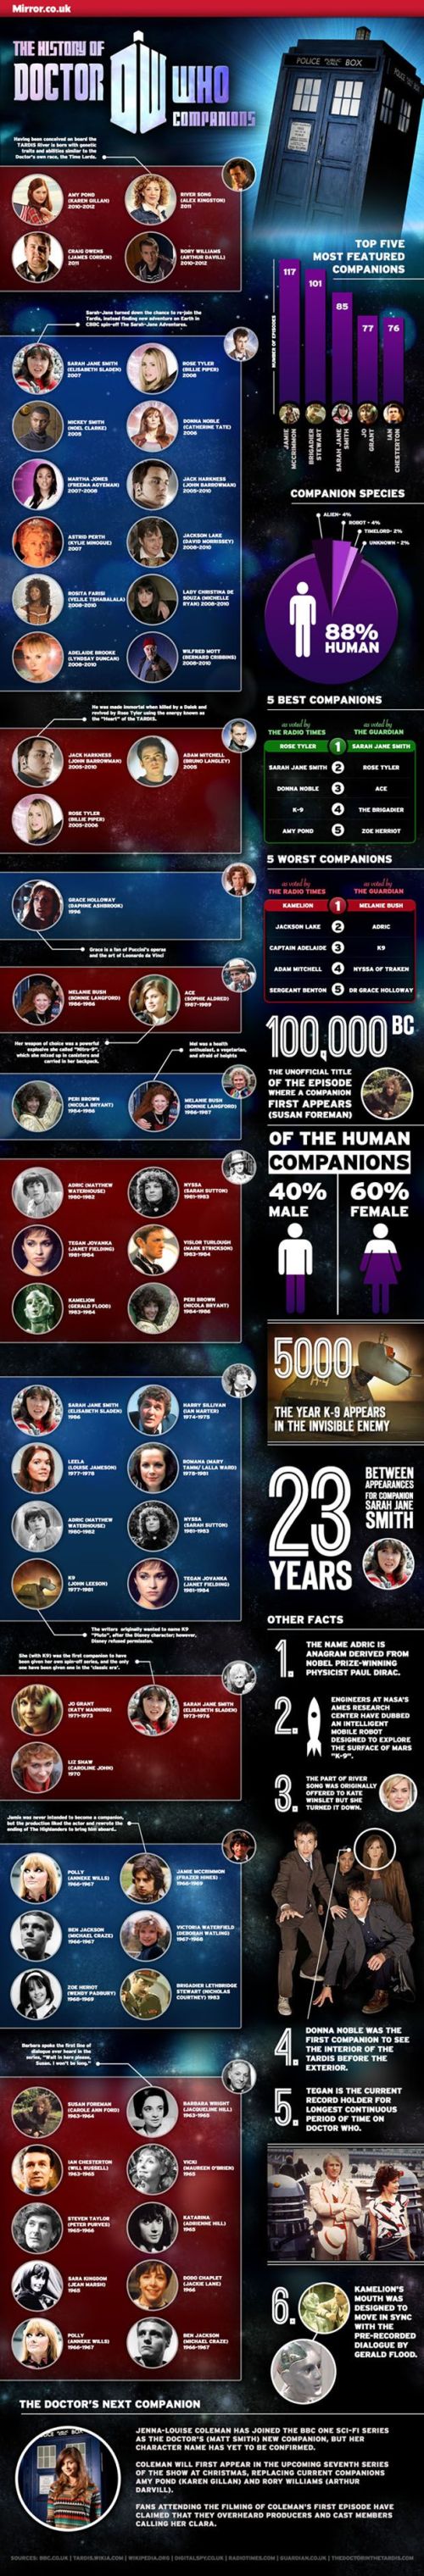 The History of Doctor Who Companions infographic